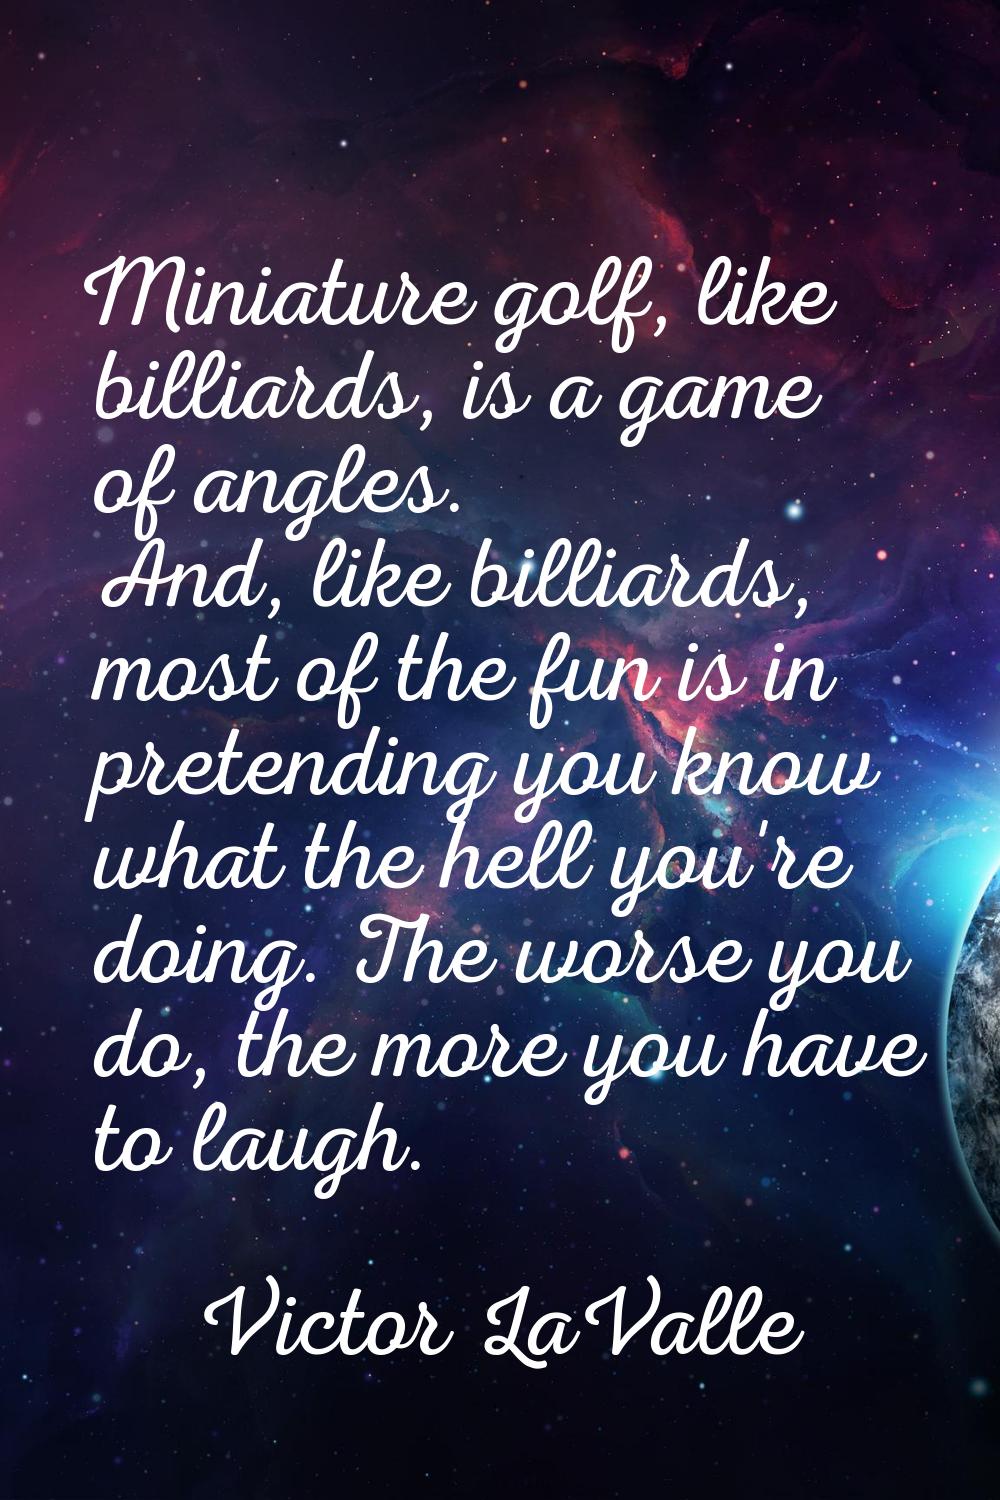 Miniature golf, like billiards, is a game of angles. And, like billiards, most of the fun is in pre